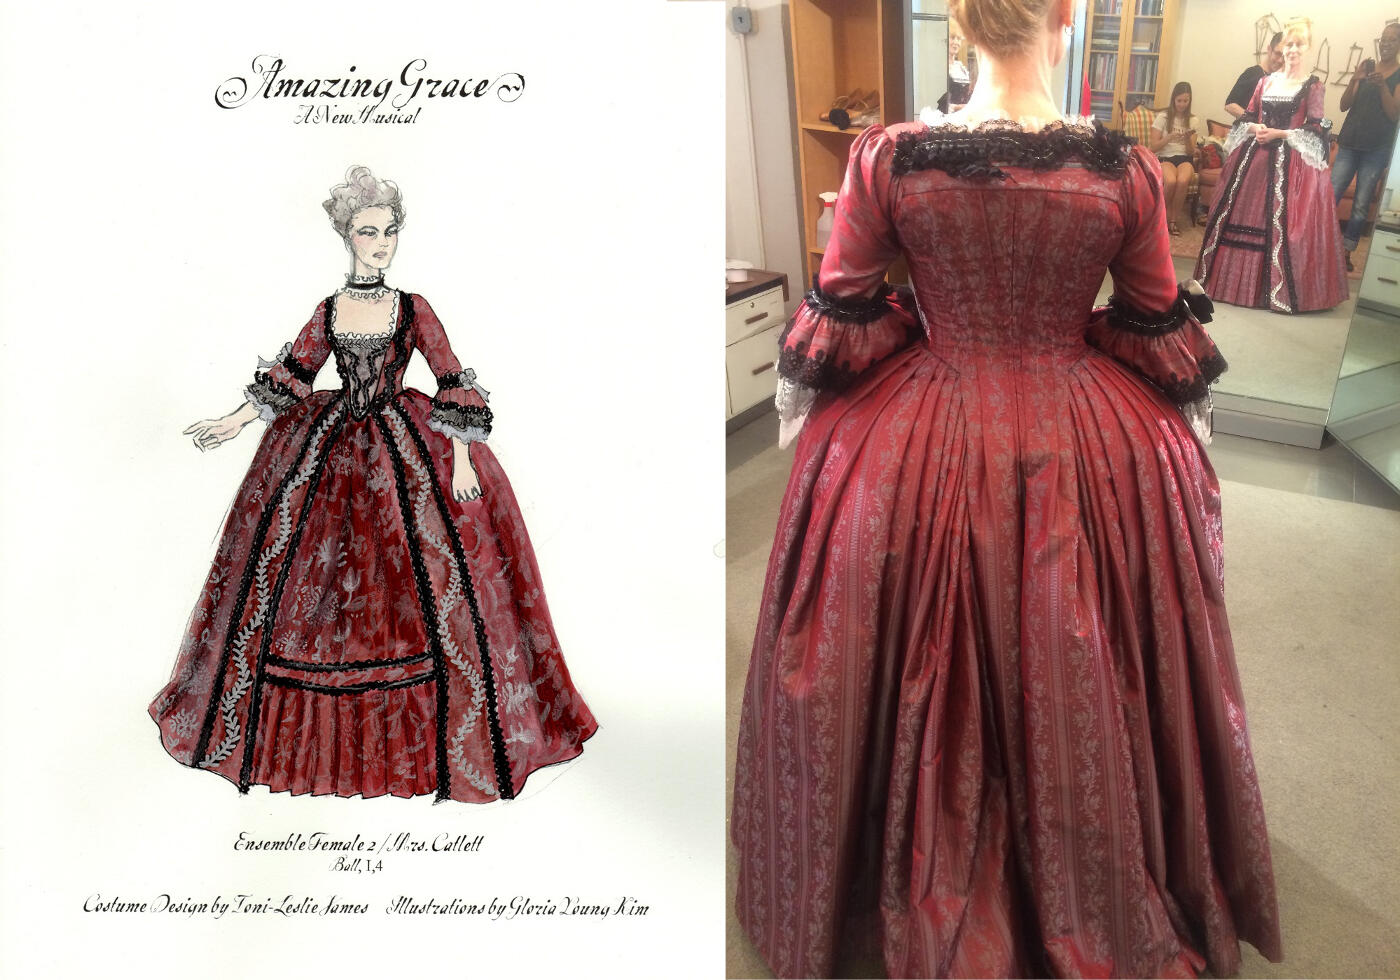 A team led by VCU's Toni-Leslie James is creating the costumes for "Amazing Grace" "from tricorne-to-buckled-shoe"